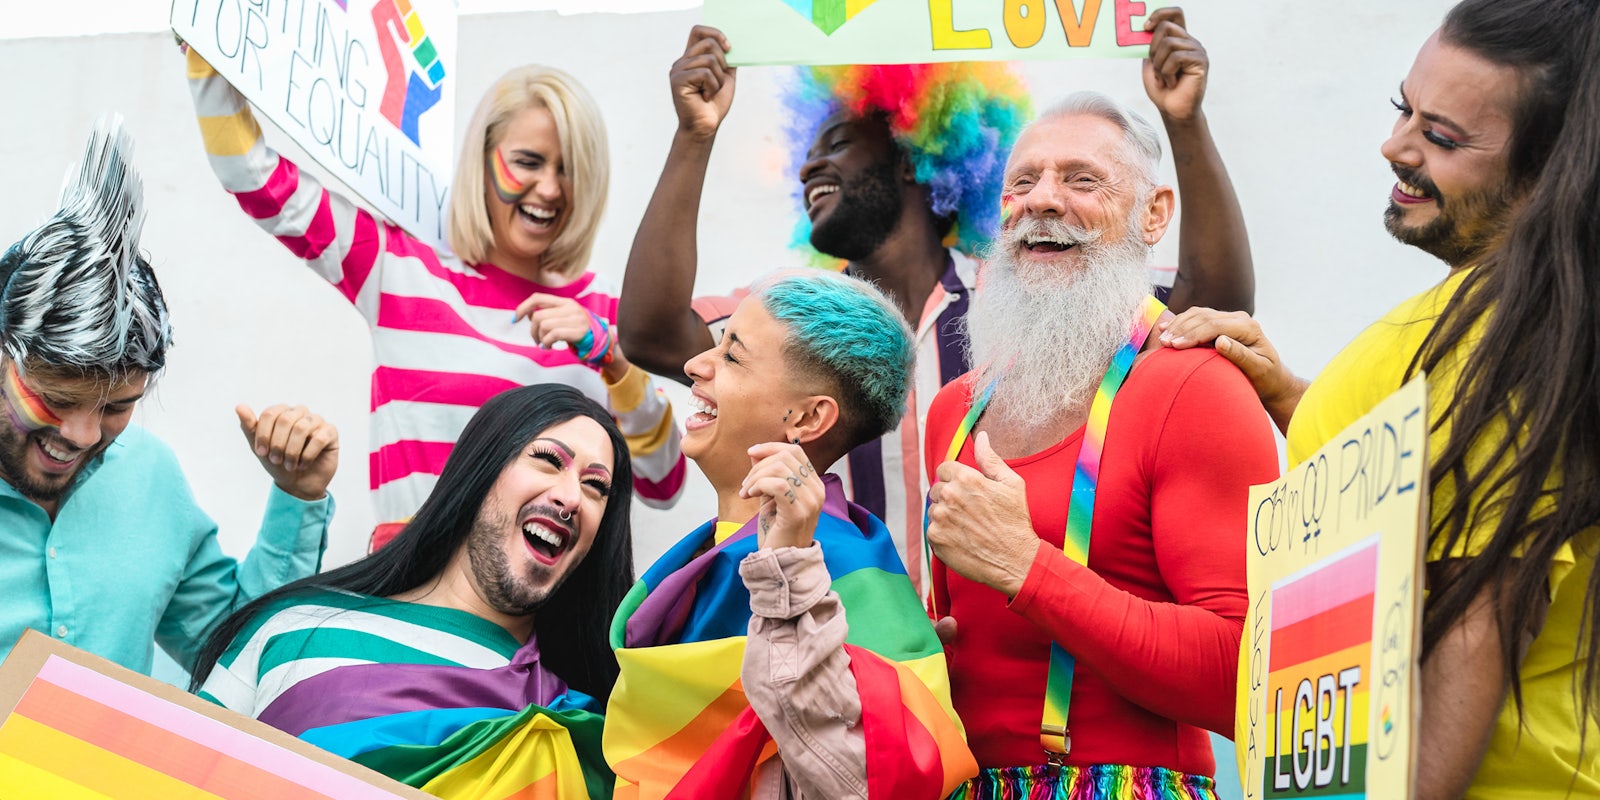 group of people celebrating gay pride event